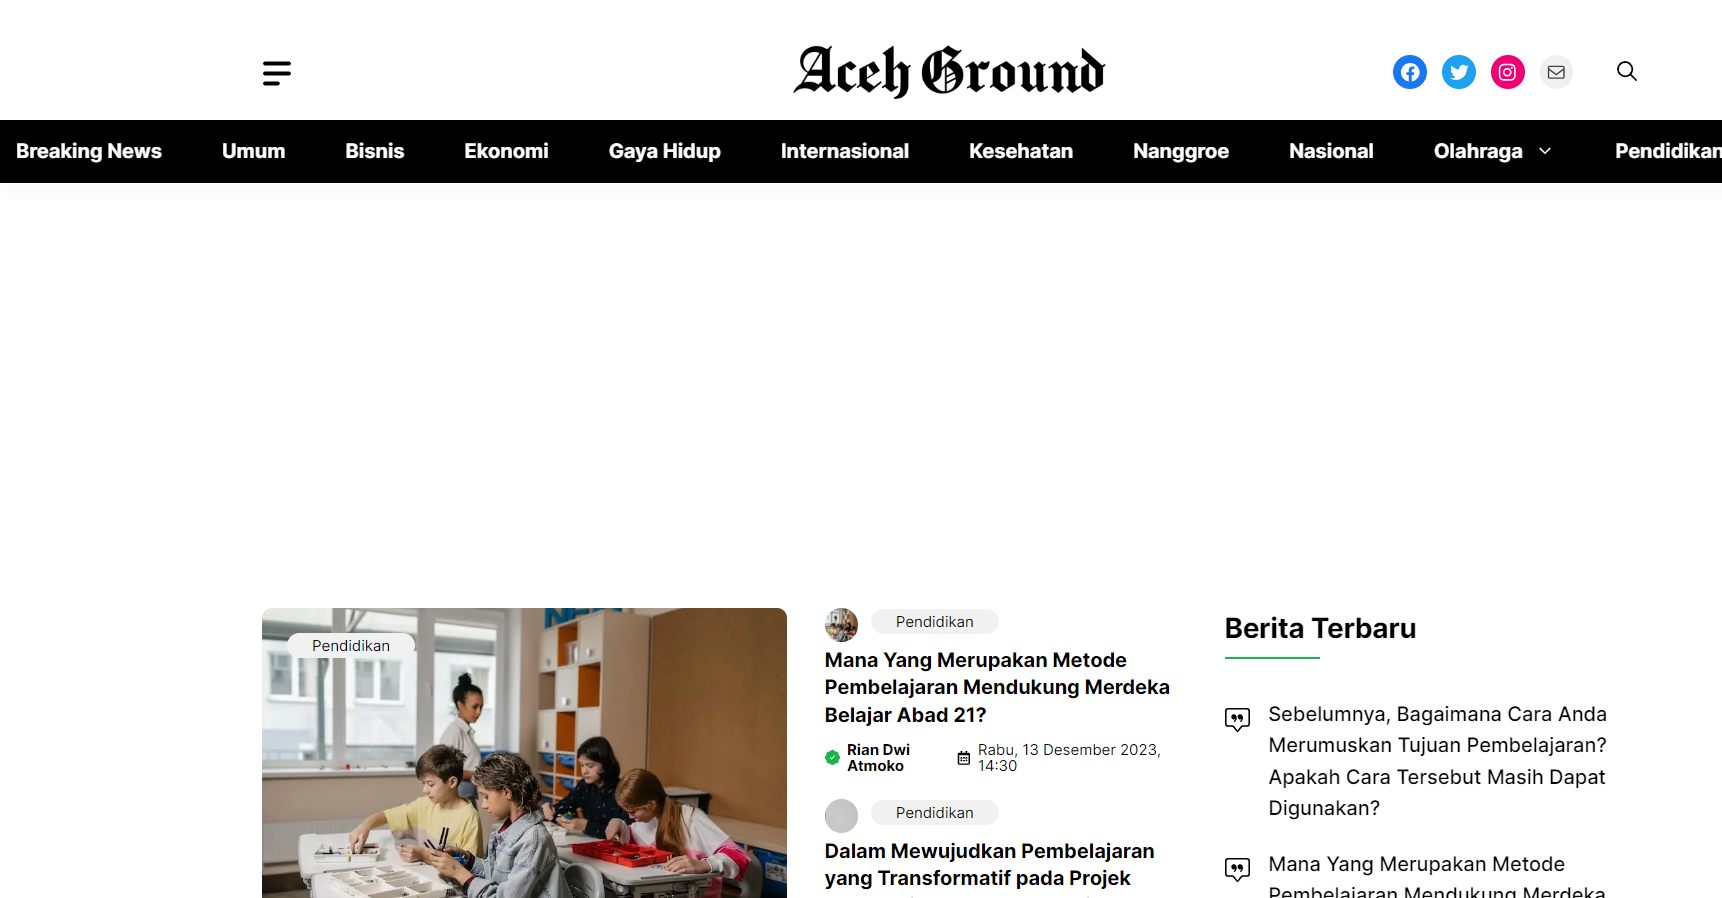 AcehGround: Up-to-Date News Platform & Insight from Aceh